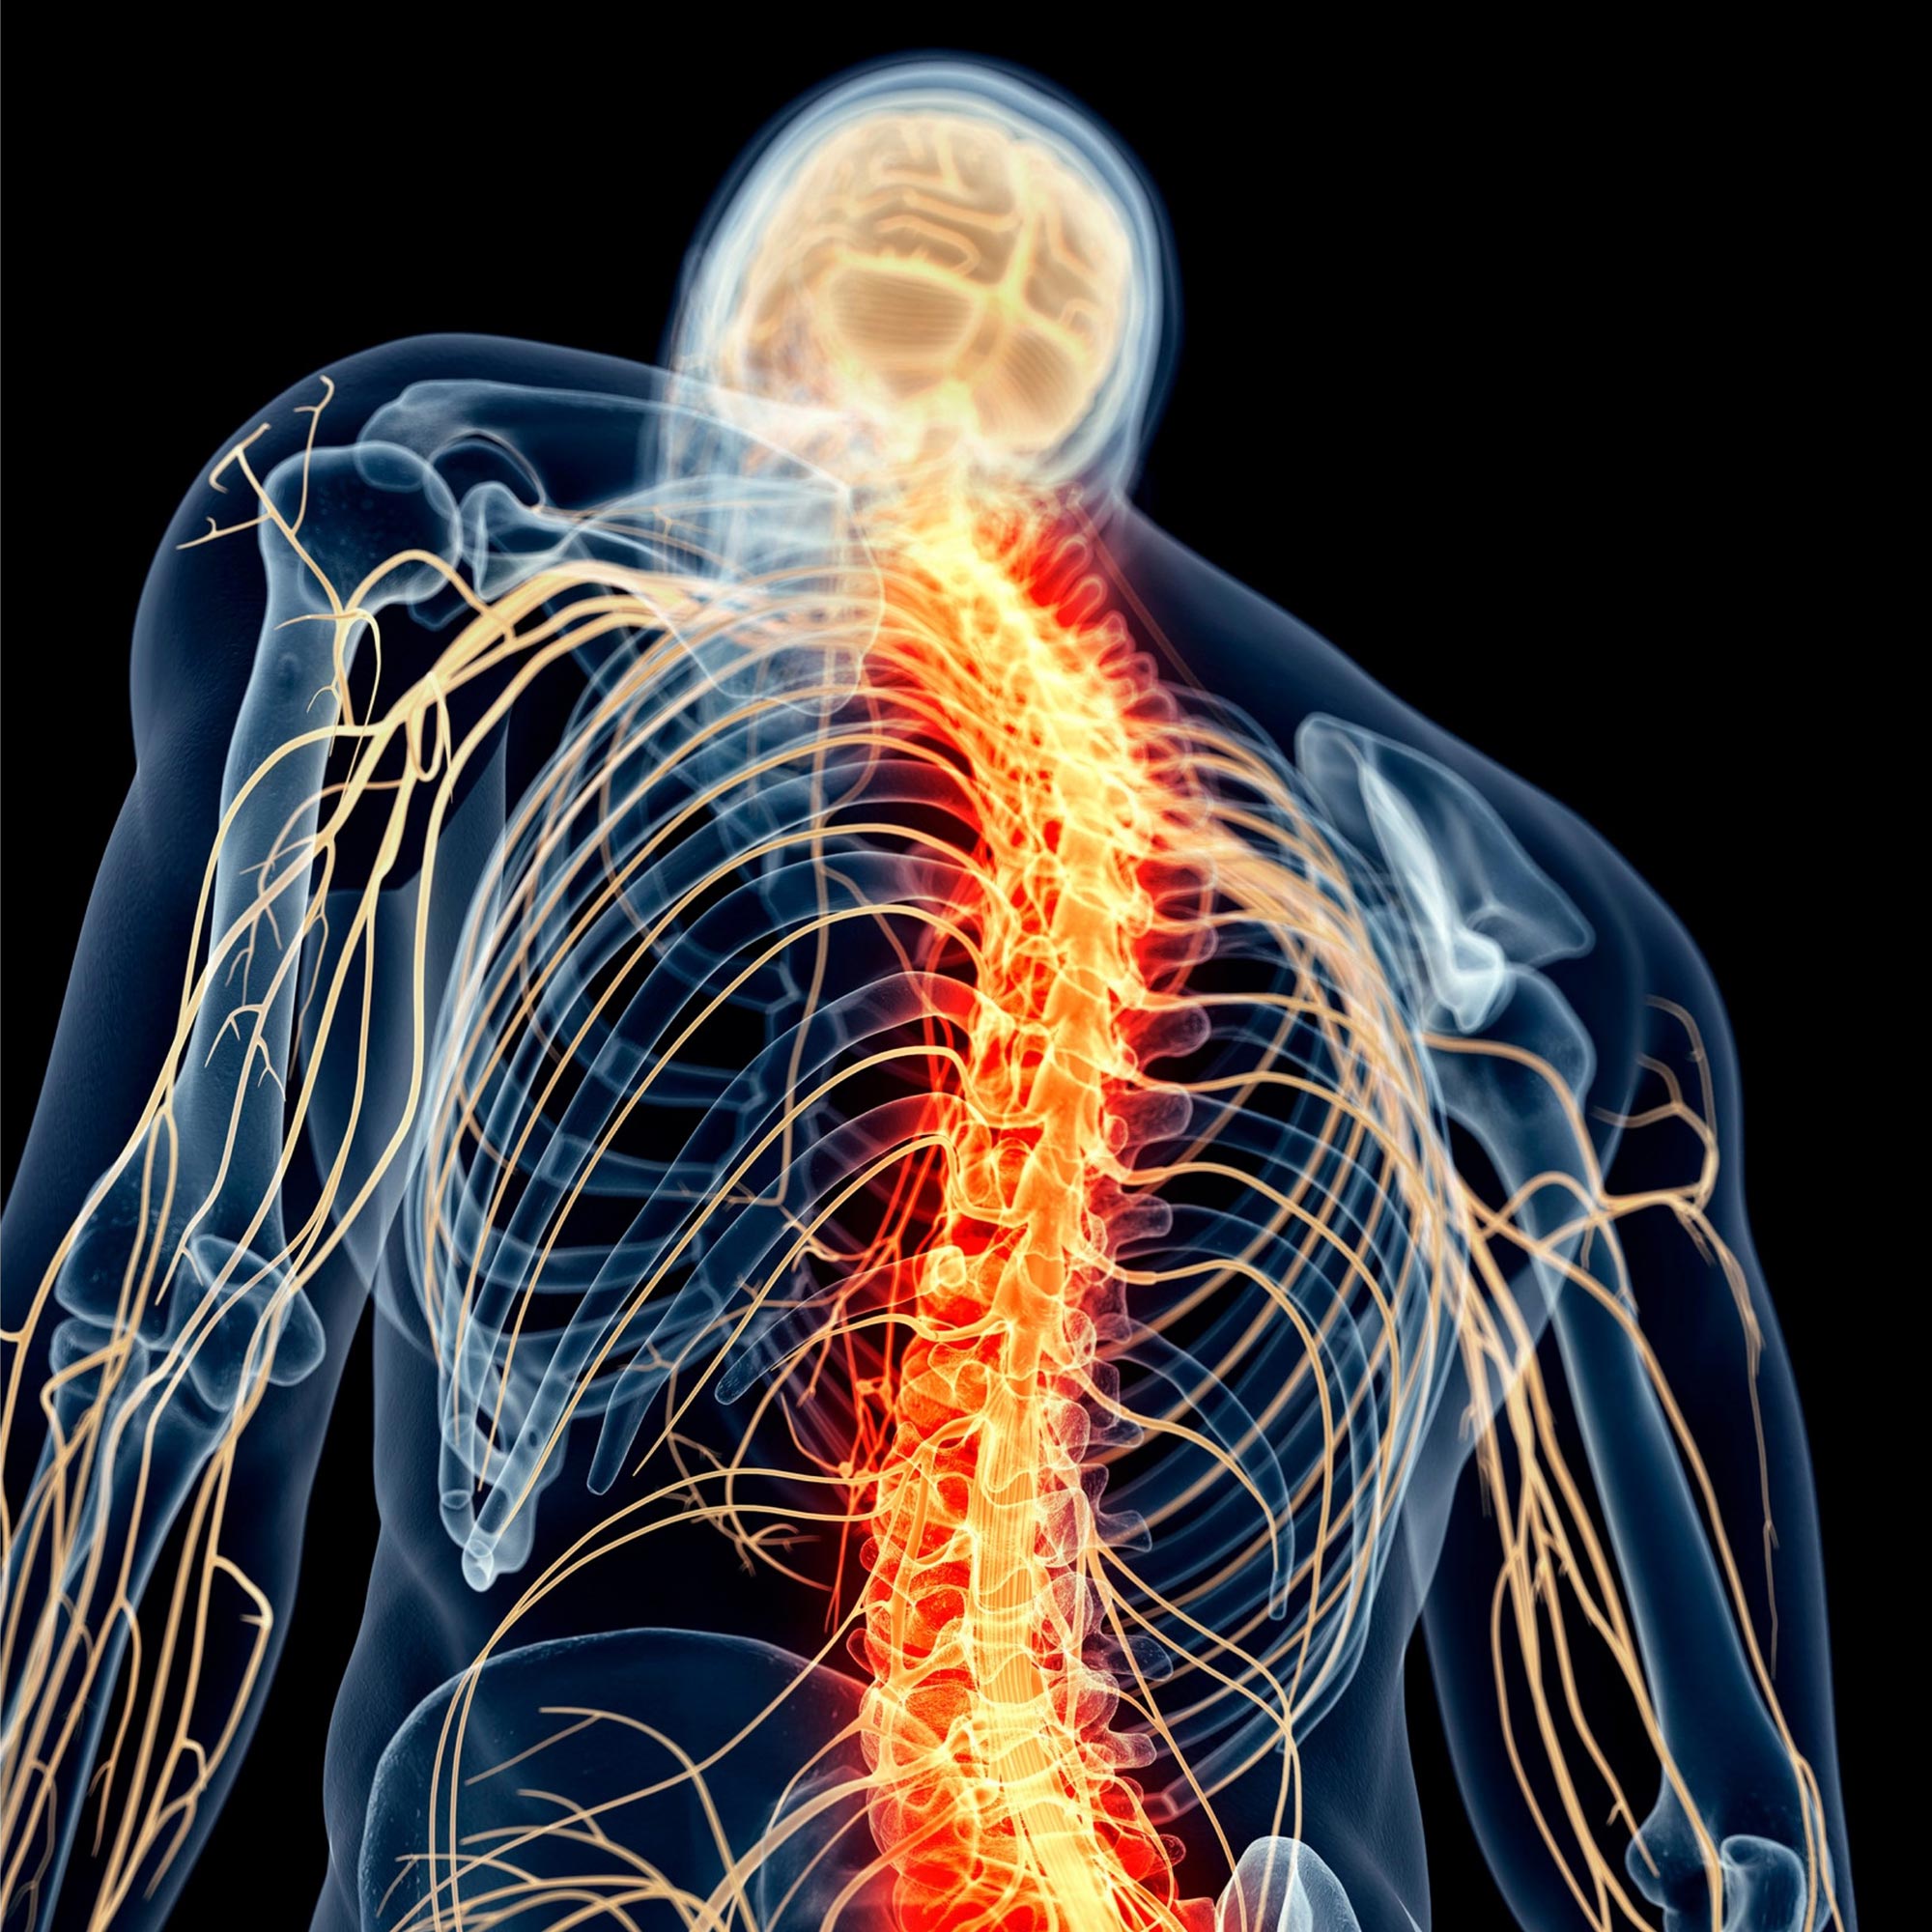 https://scitechdaily.com/images/Spinal-Cord-Nerve-Pain.jpg